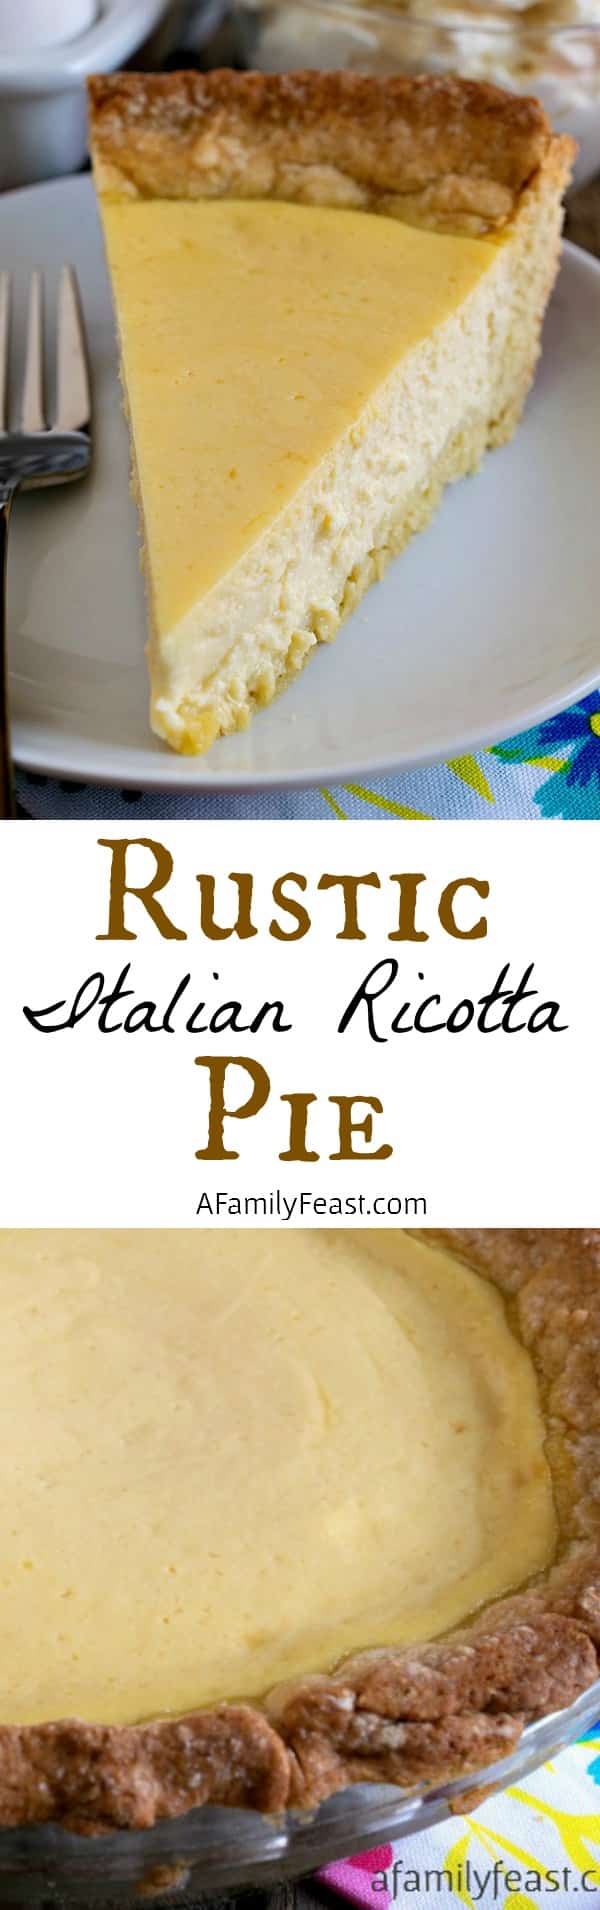 This 100+ year old recipe for Italian Ricotta Pie has been passed down through generations. Perfectly sweet with great flavors - a slice of Italy!